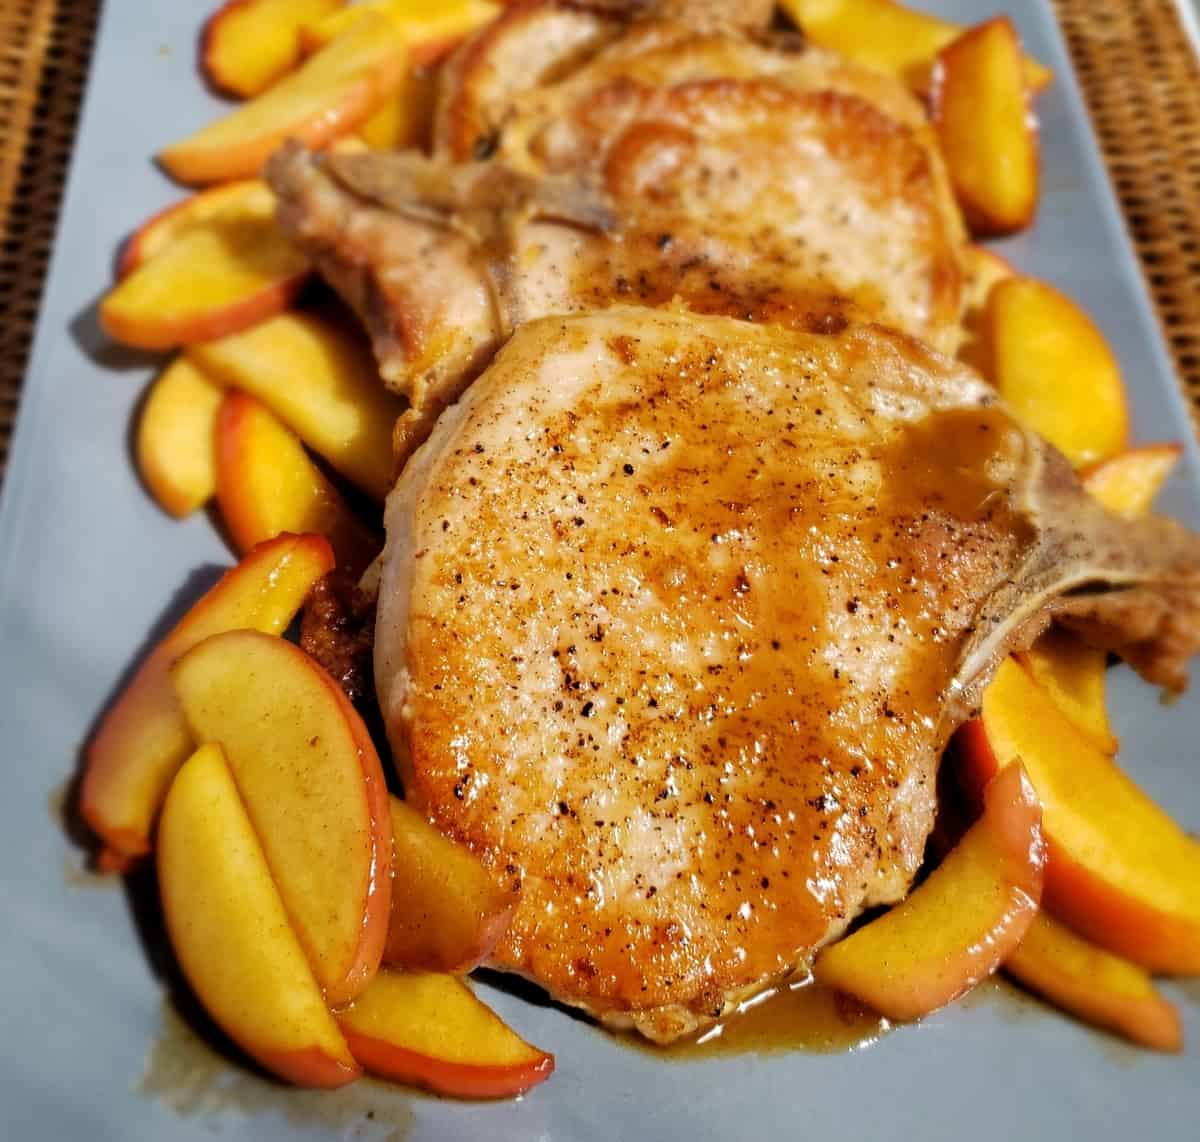 Seared bone-in pork chops with cinnamon apples on either side of them.